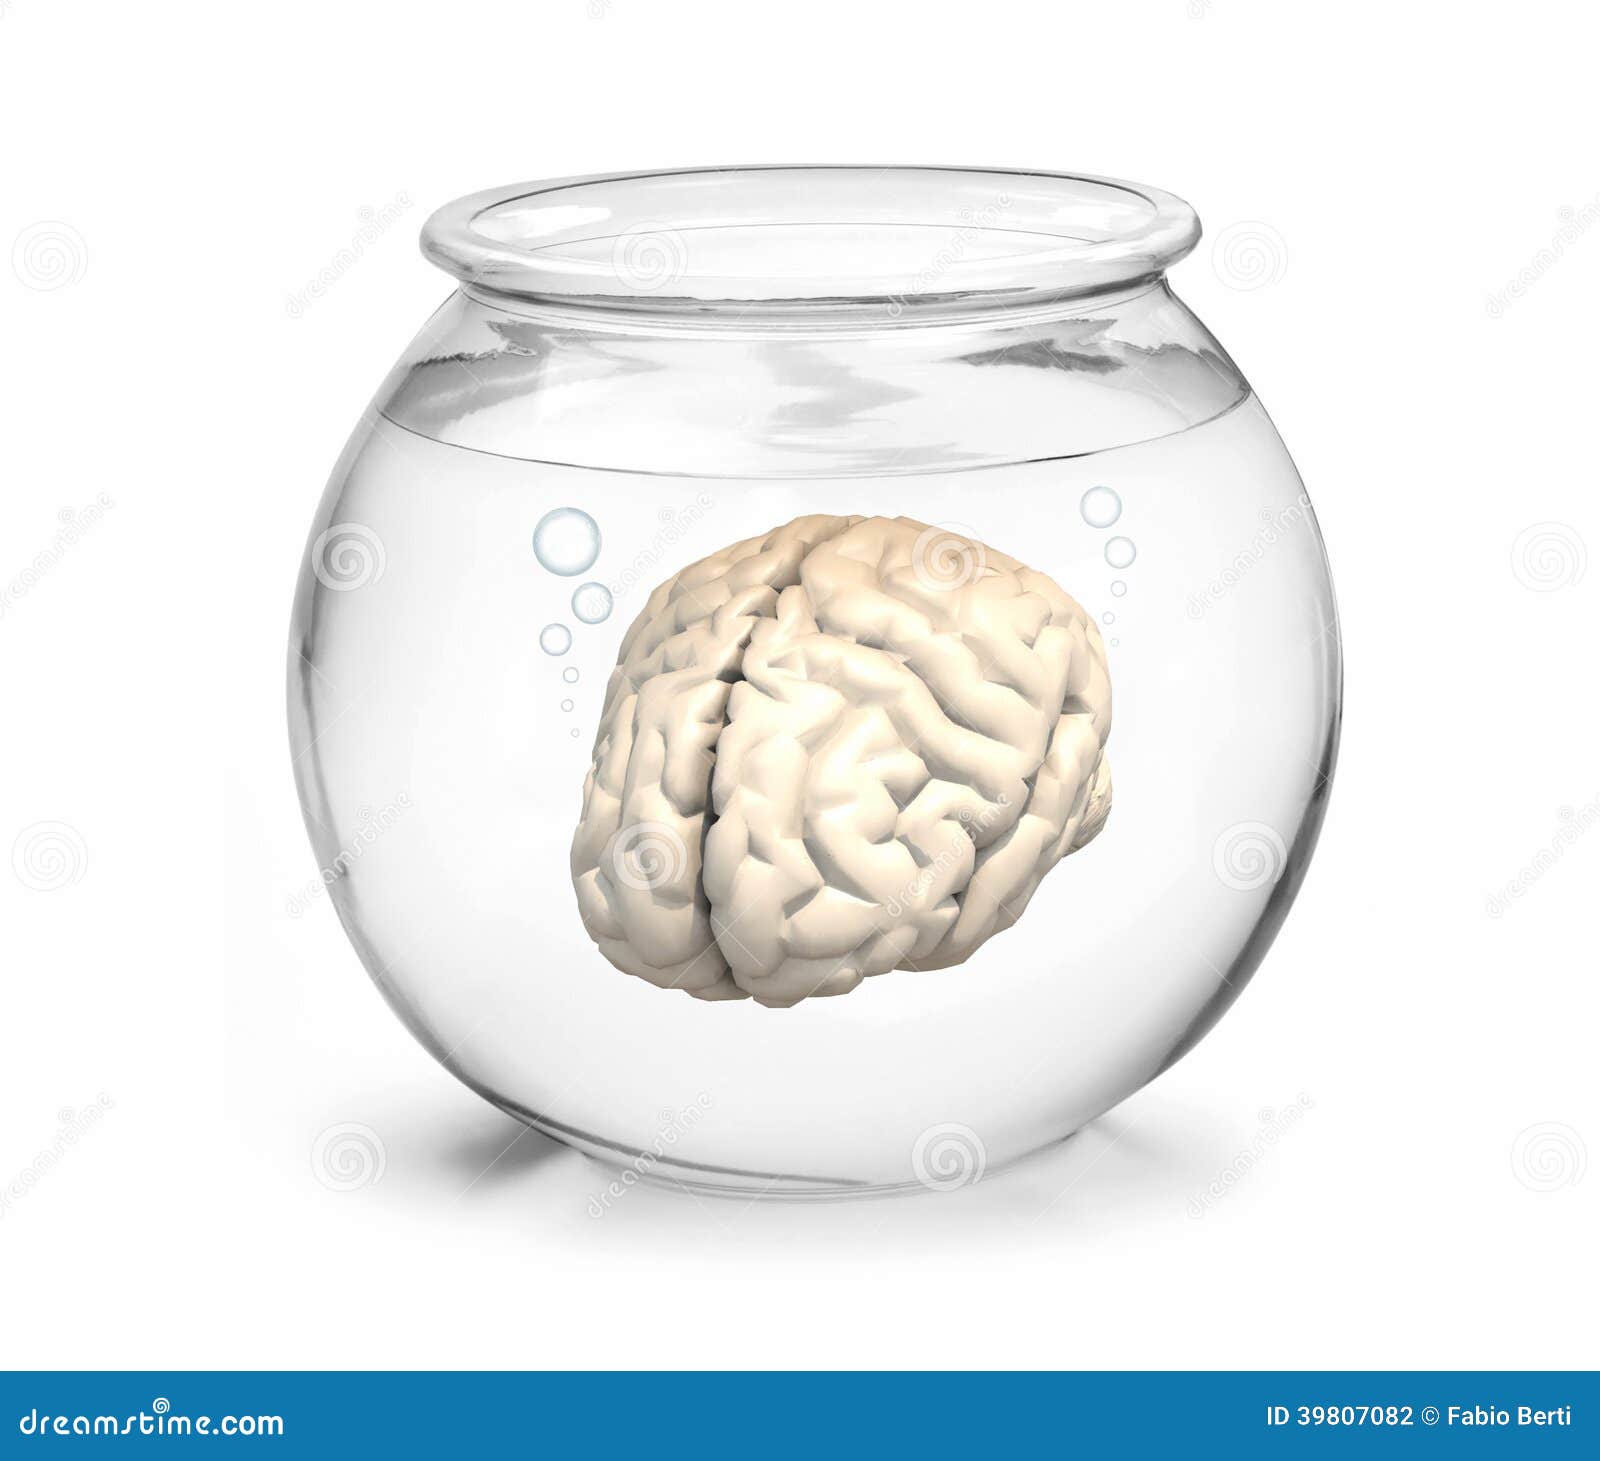 fishbowl with brain inside